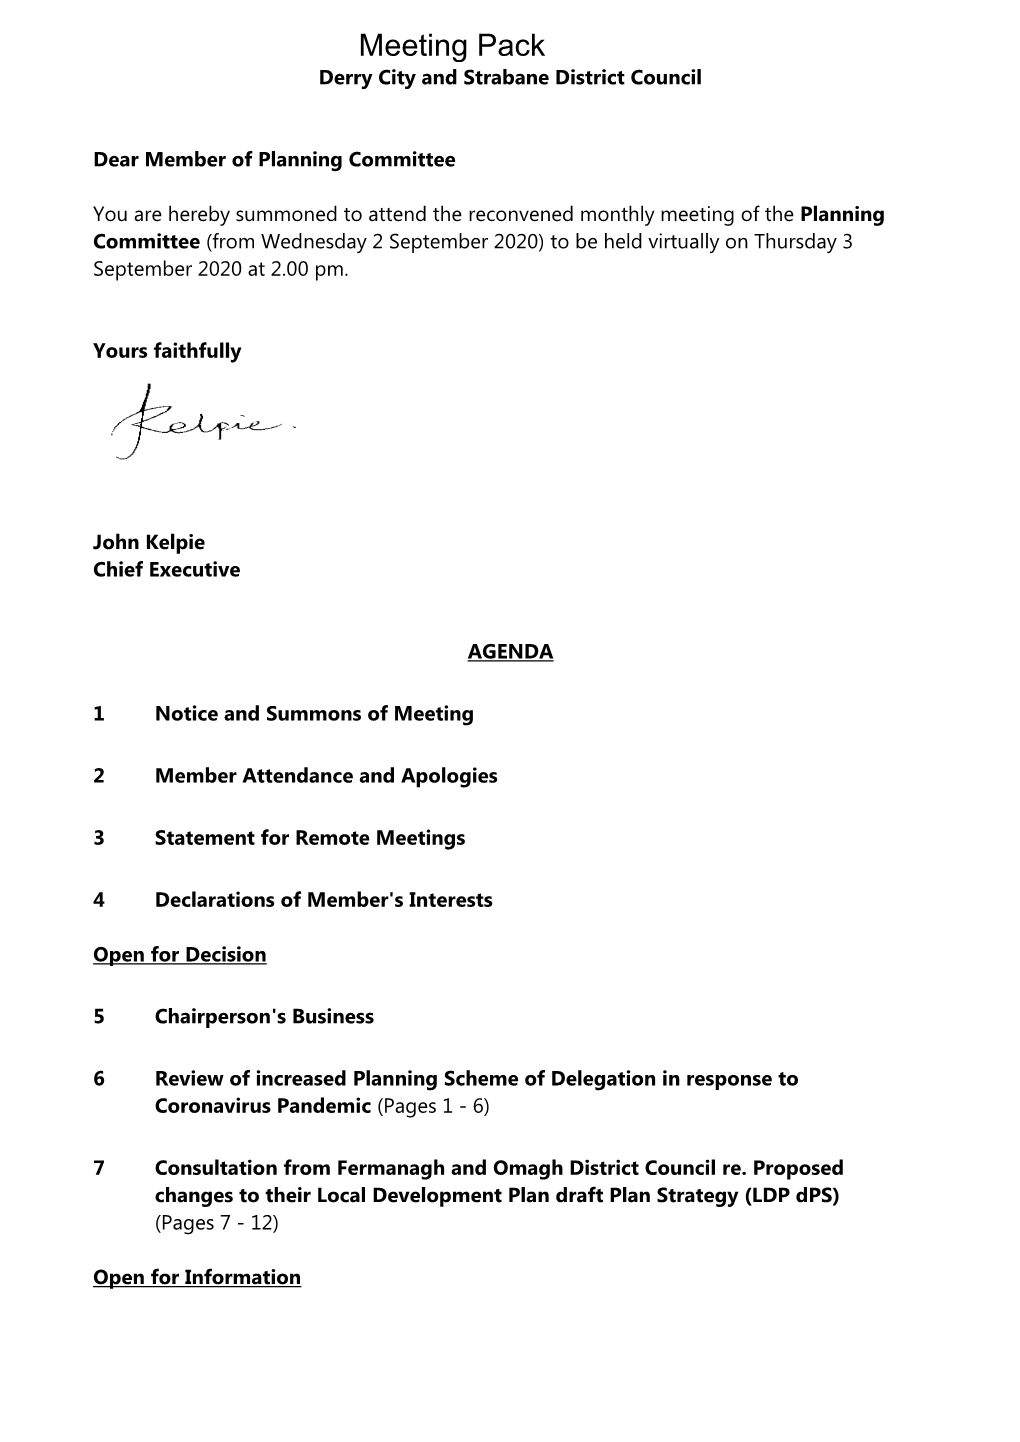 (Public Pack)Agenda Document for Planning Committee, 03/09/2020